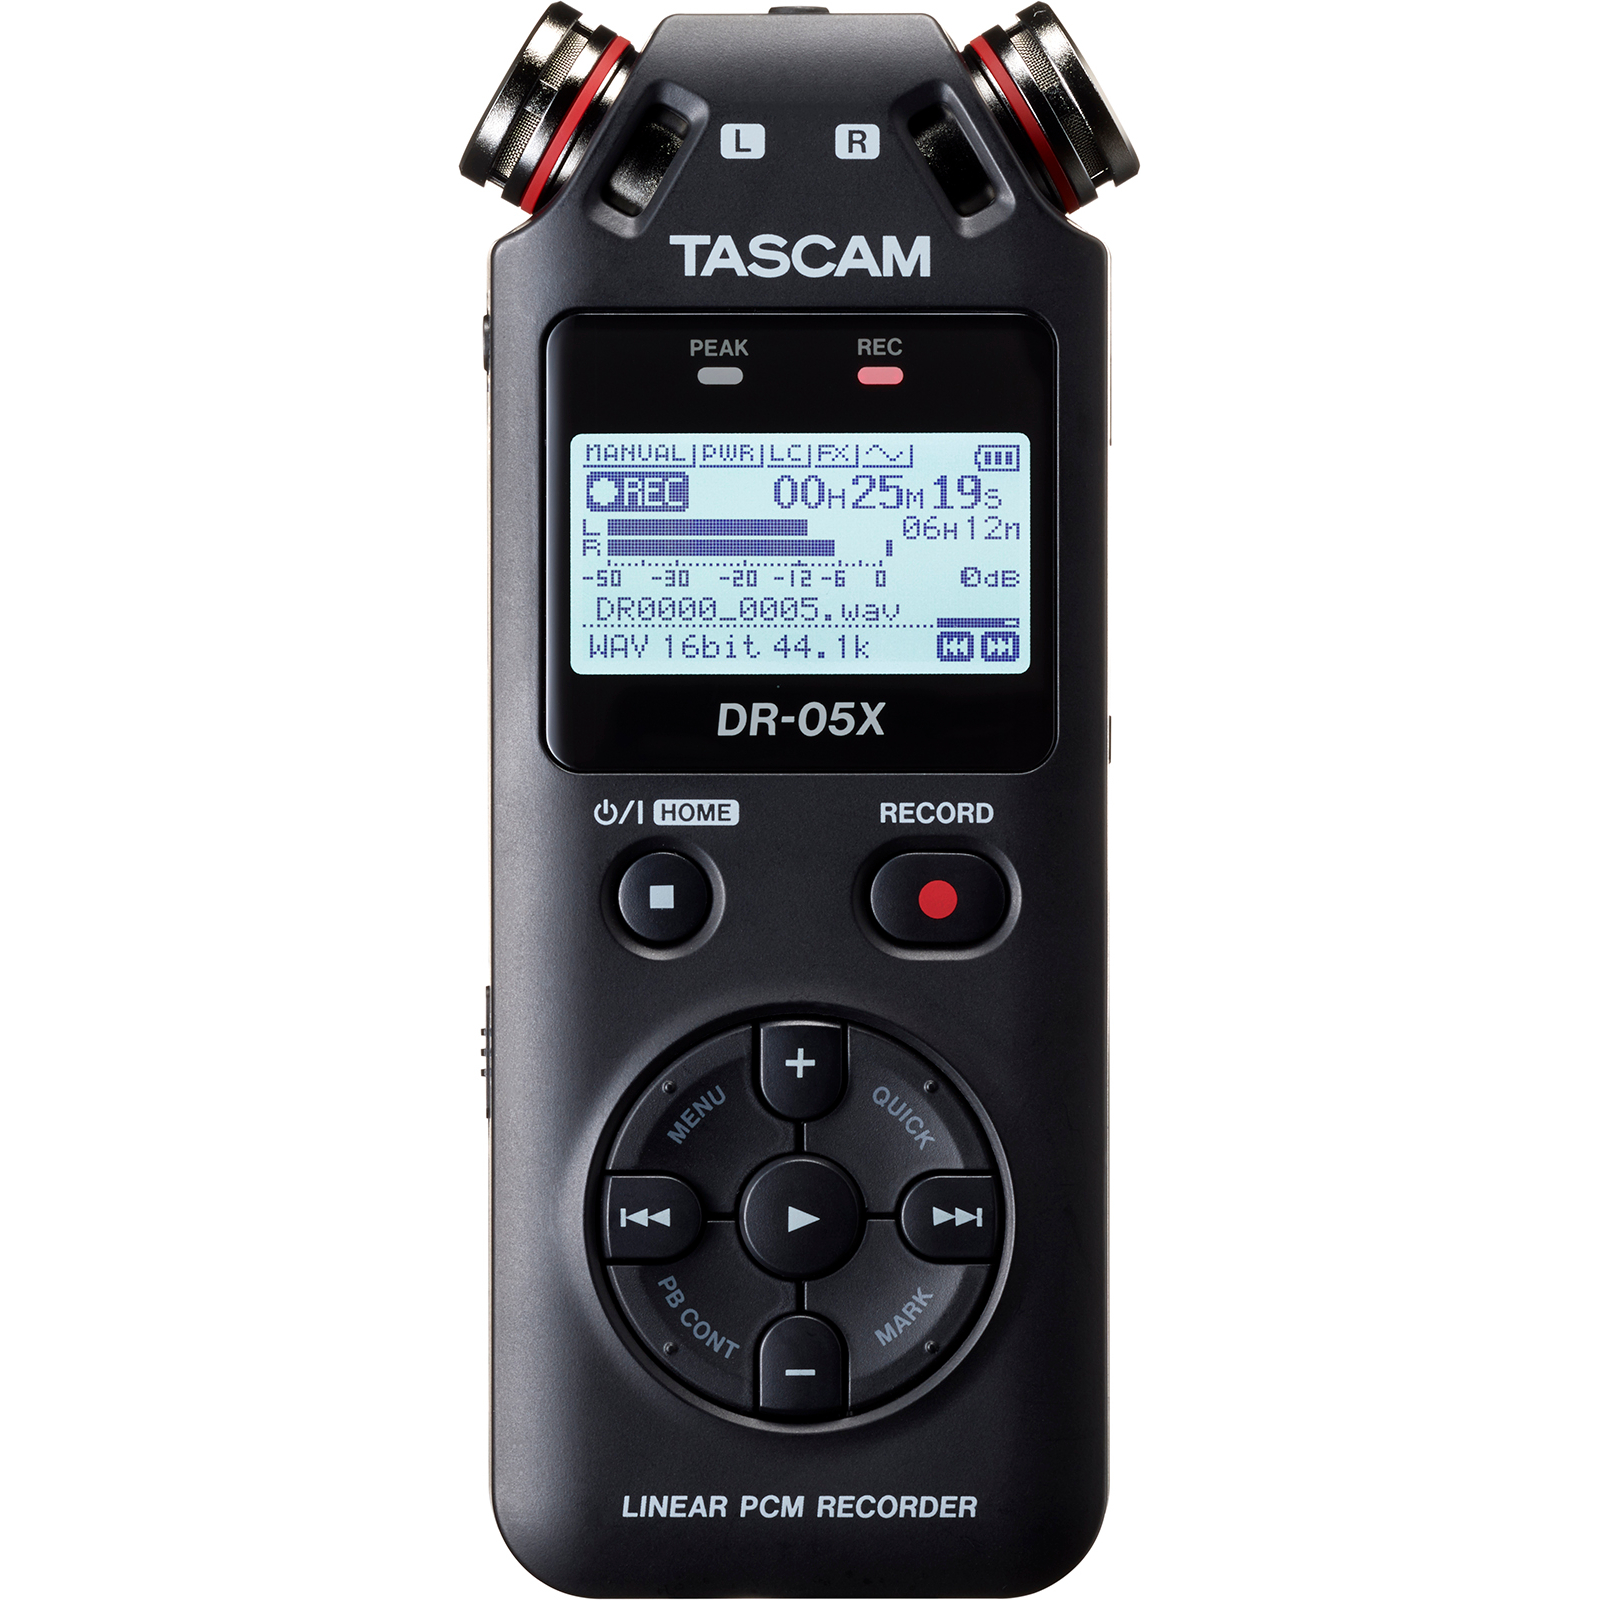 Tascam DR-05X - Digital MP3 and WAV audio recorder Questions & Answers